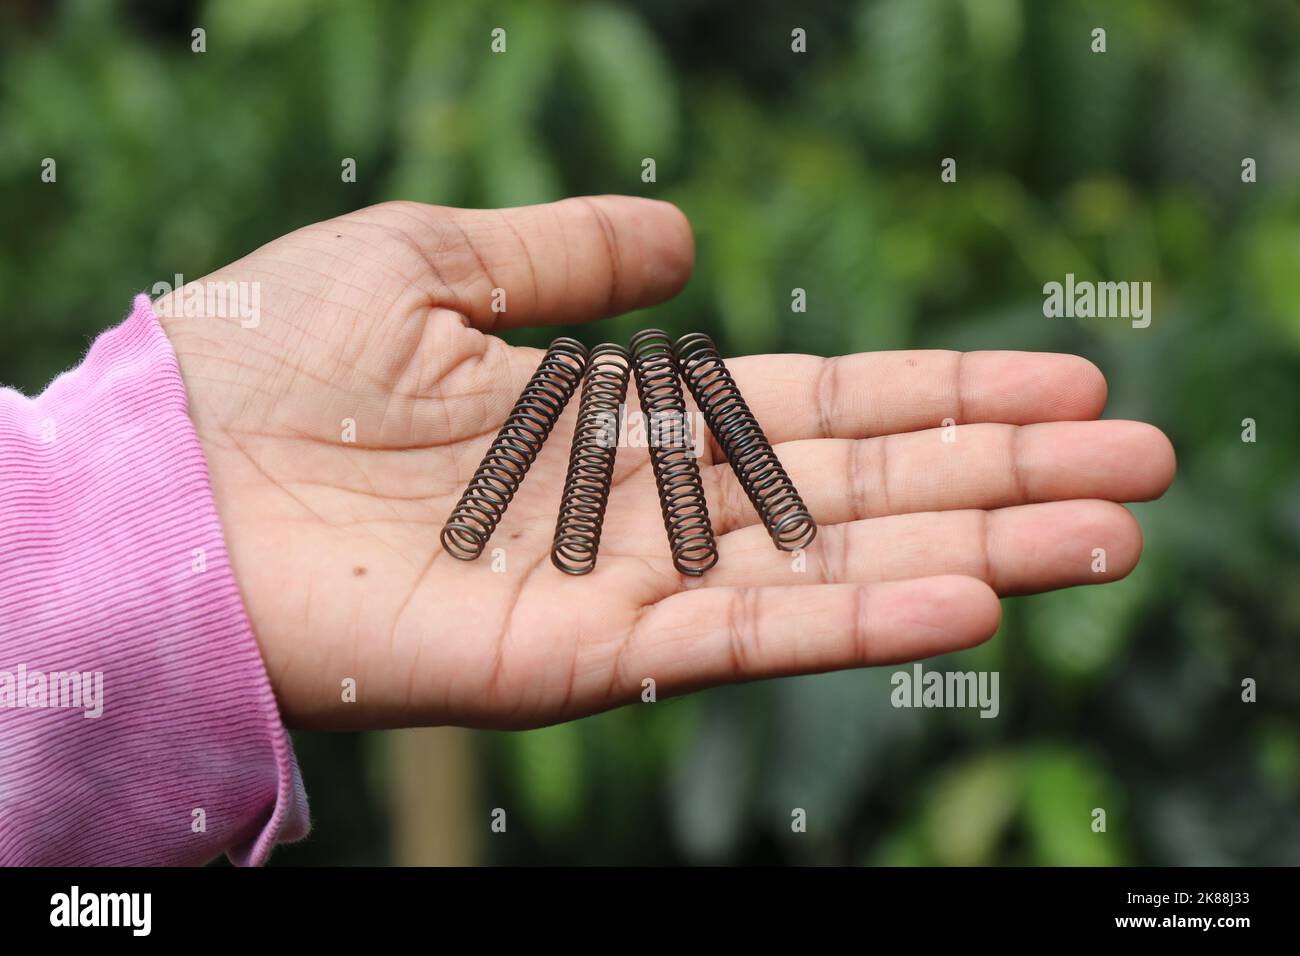 Compression springs held in hand on a nature background Stock Photo